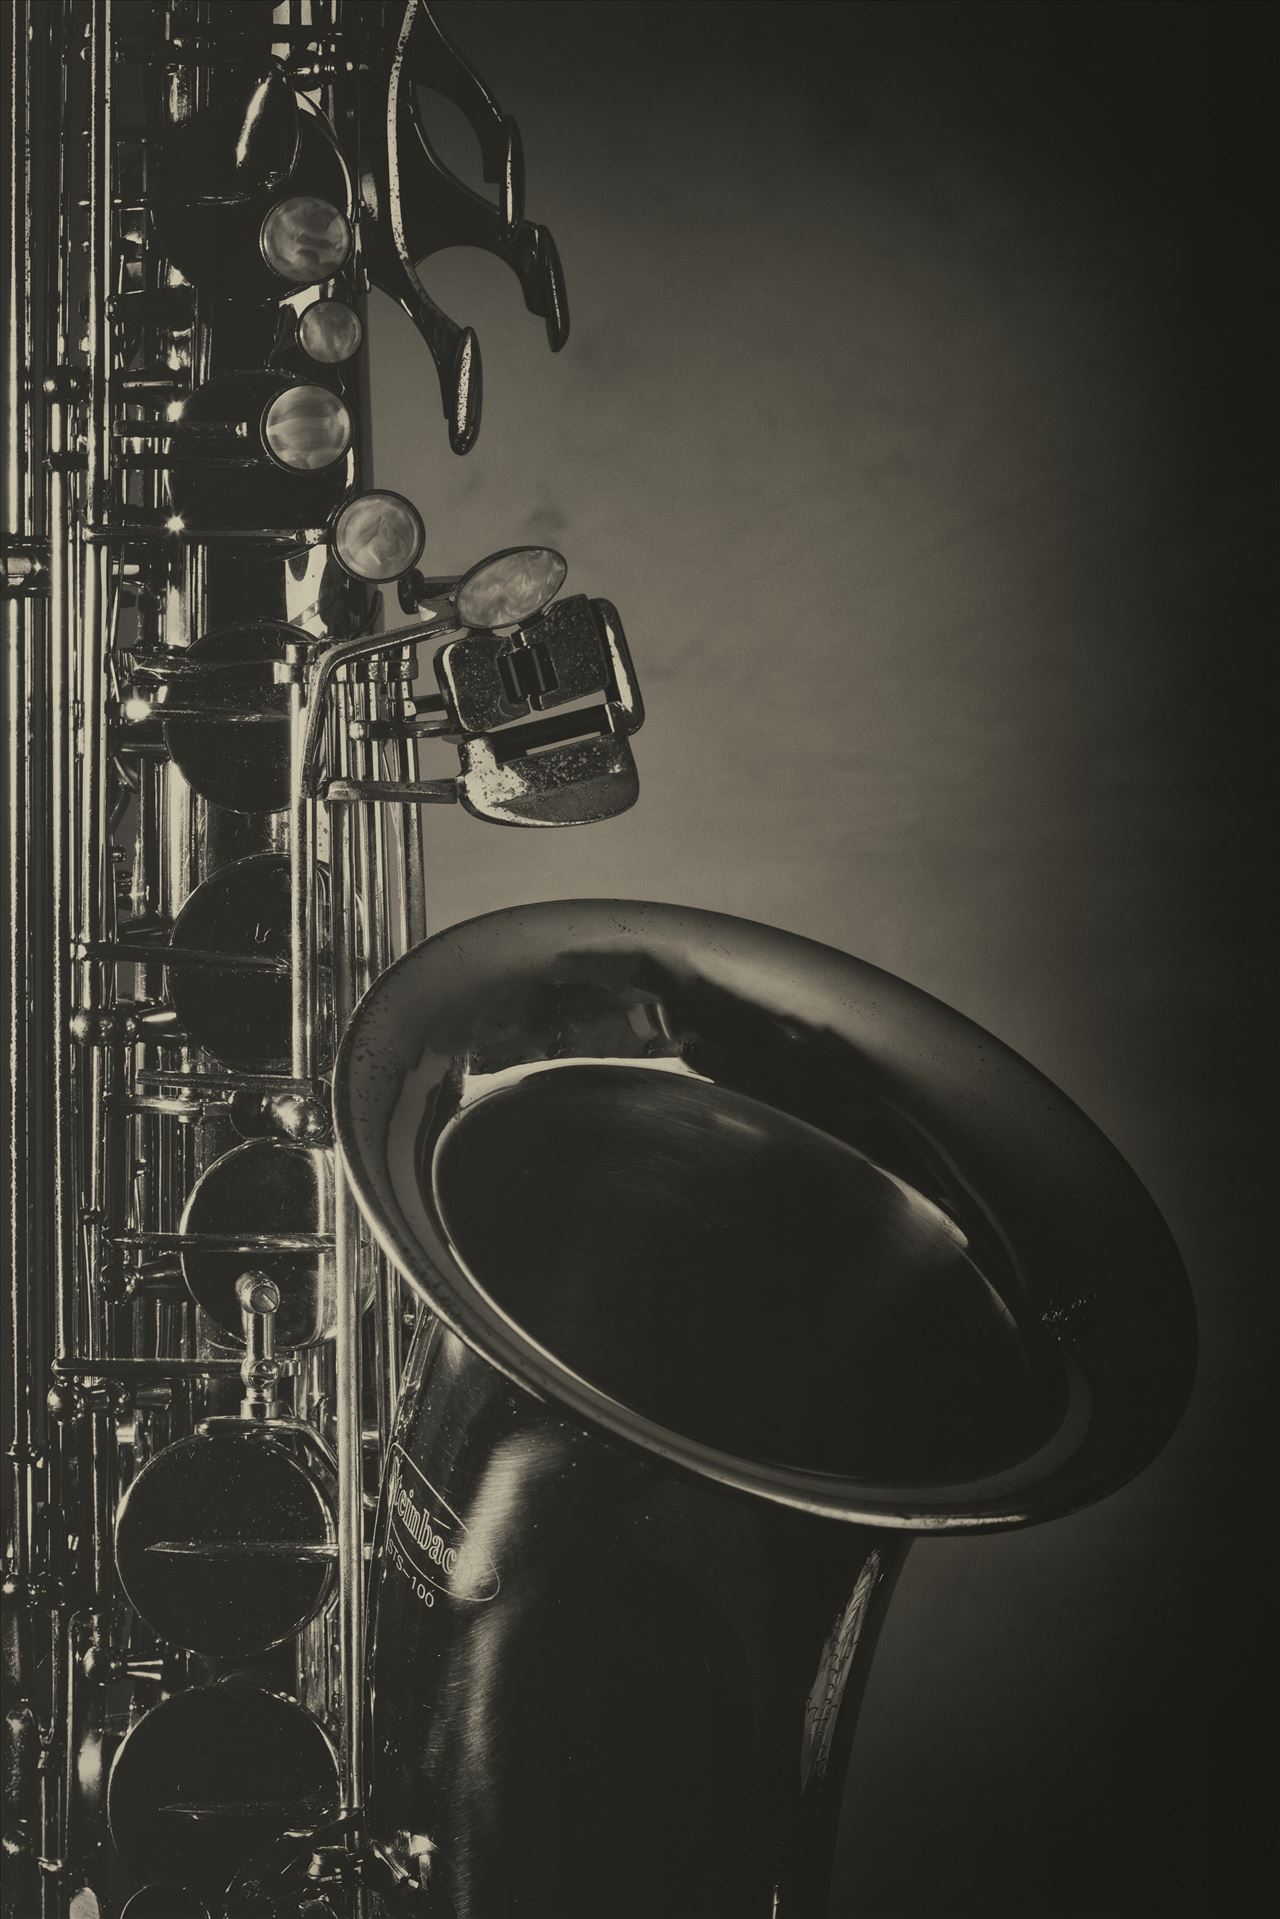 Sax - Saxophone on black and white image by Pucko